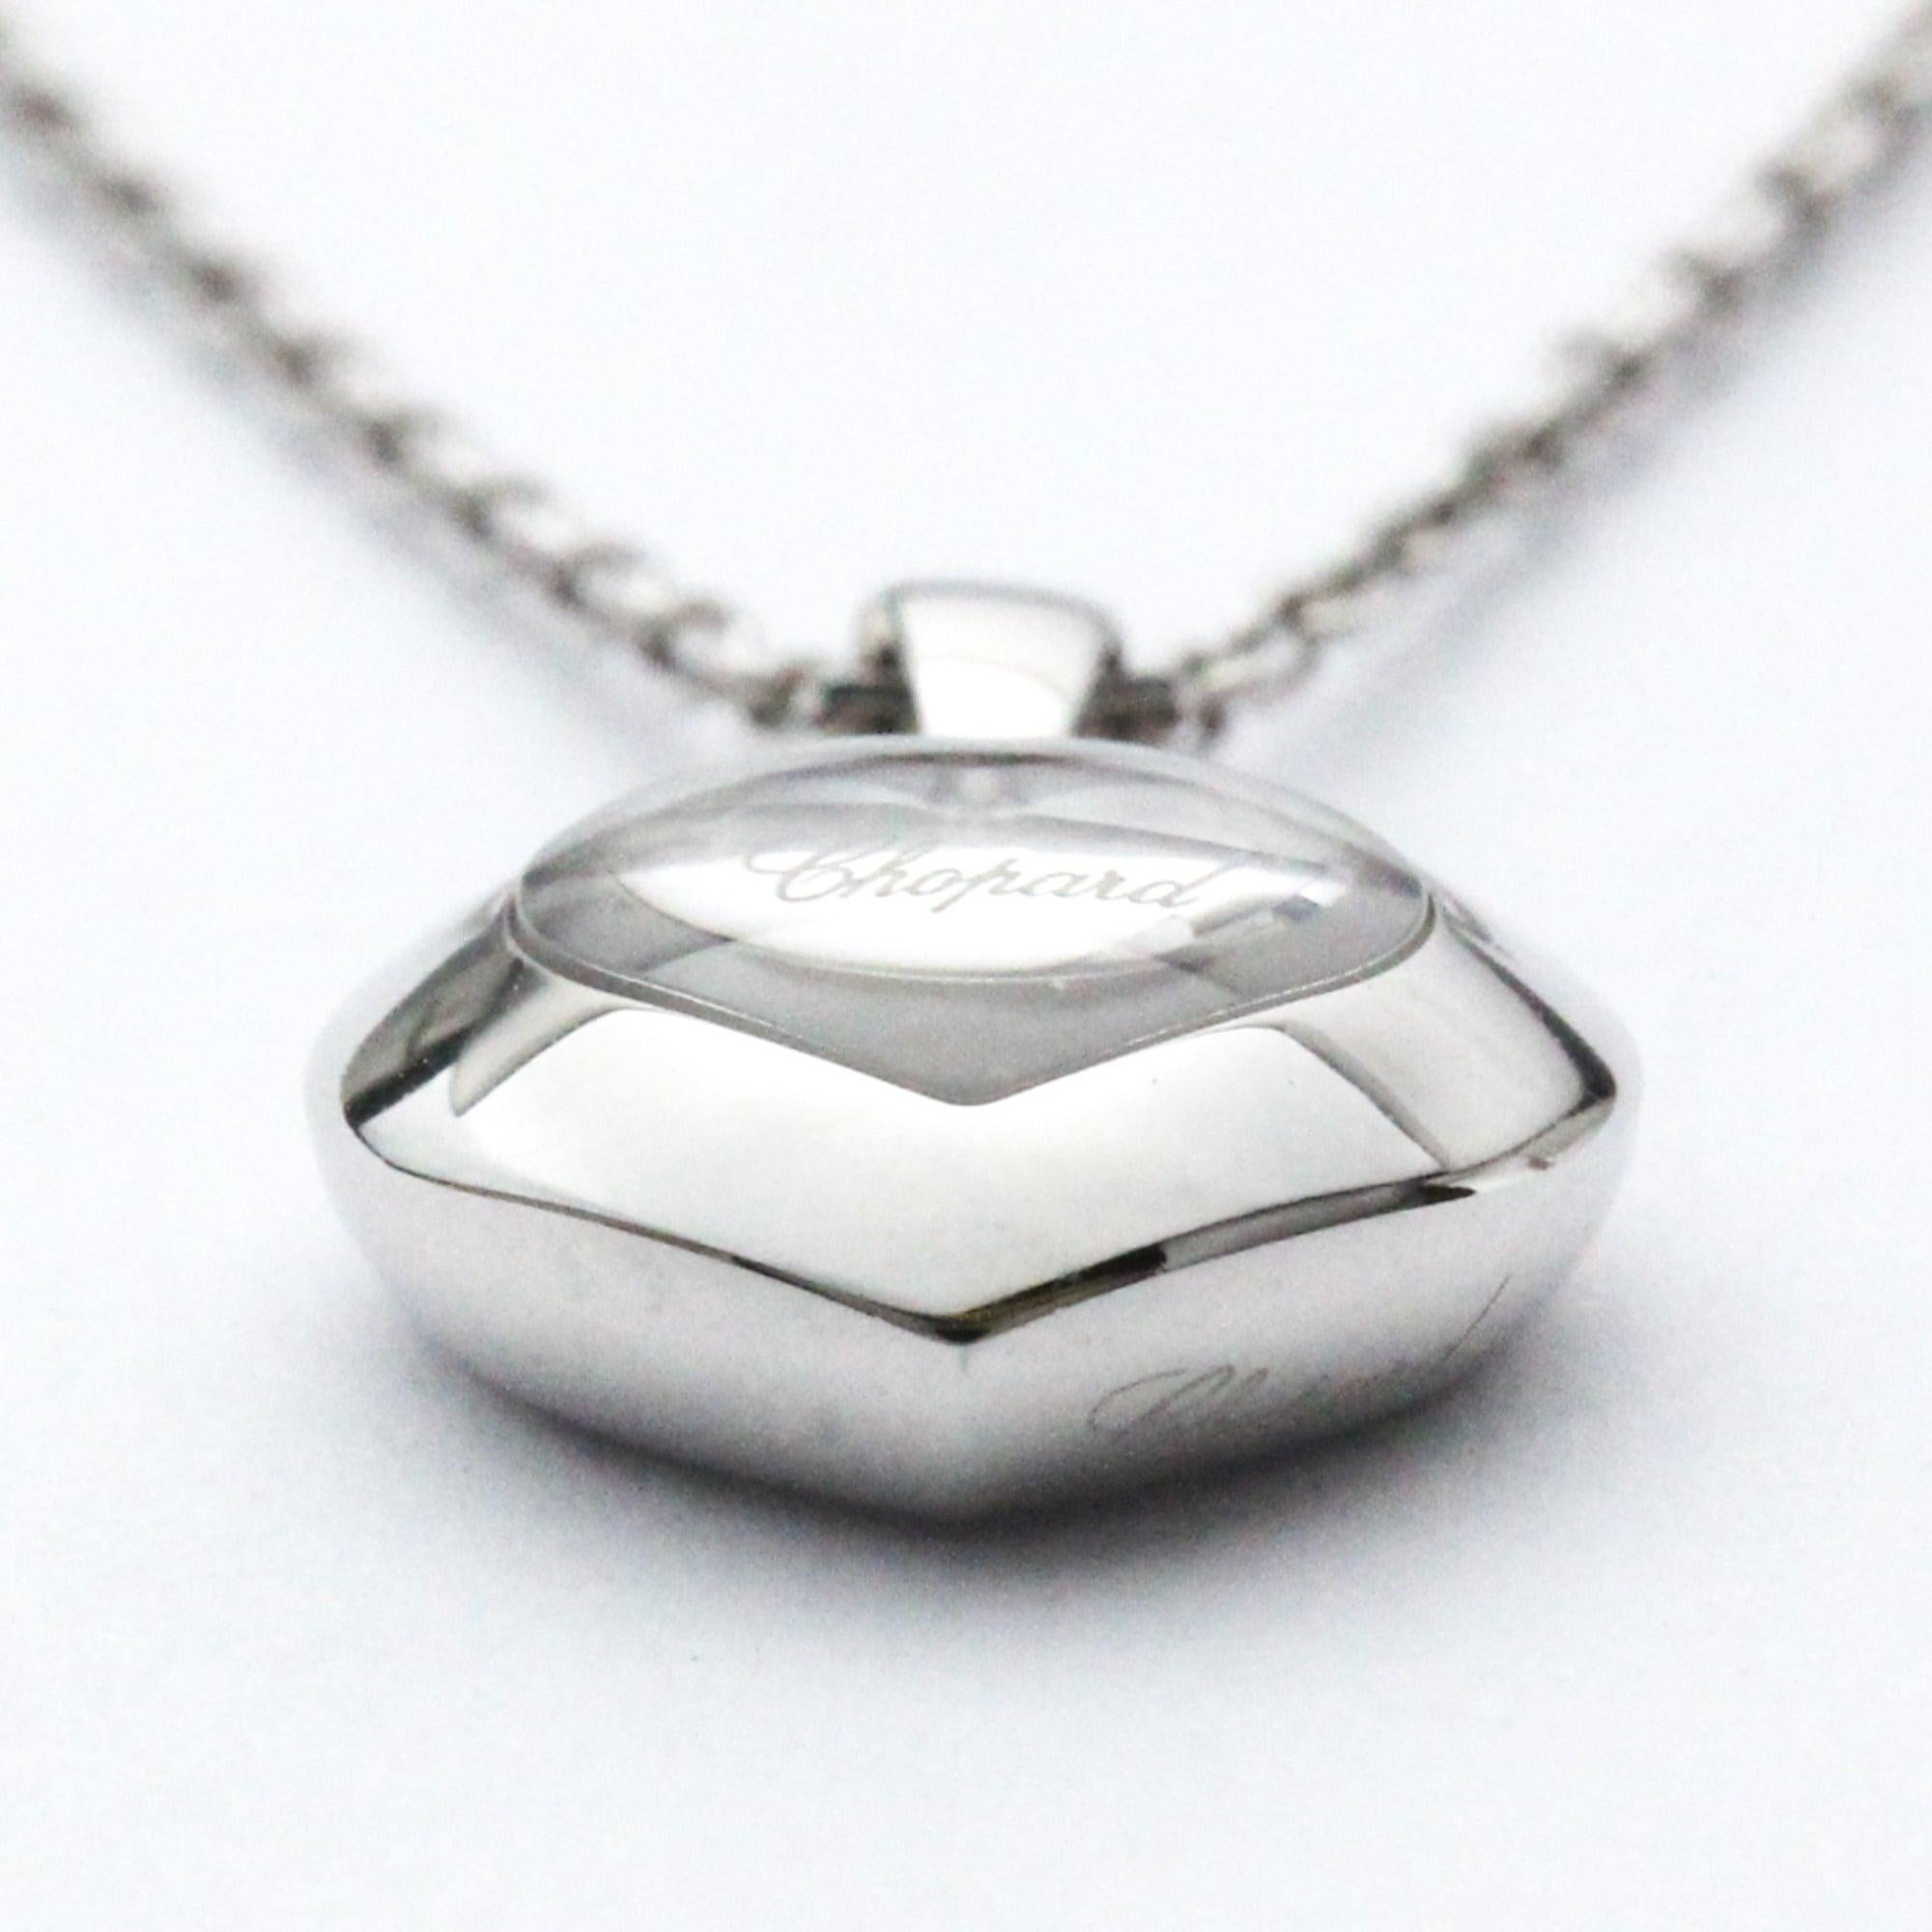 Chopard Diamond Heart Necklace in 18K White Gold In Excellent Condition For Sale In London, GB